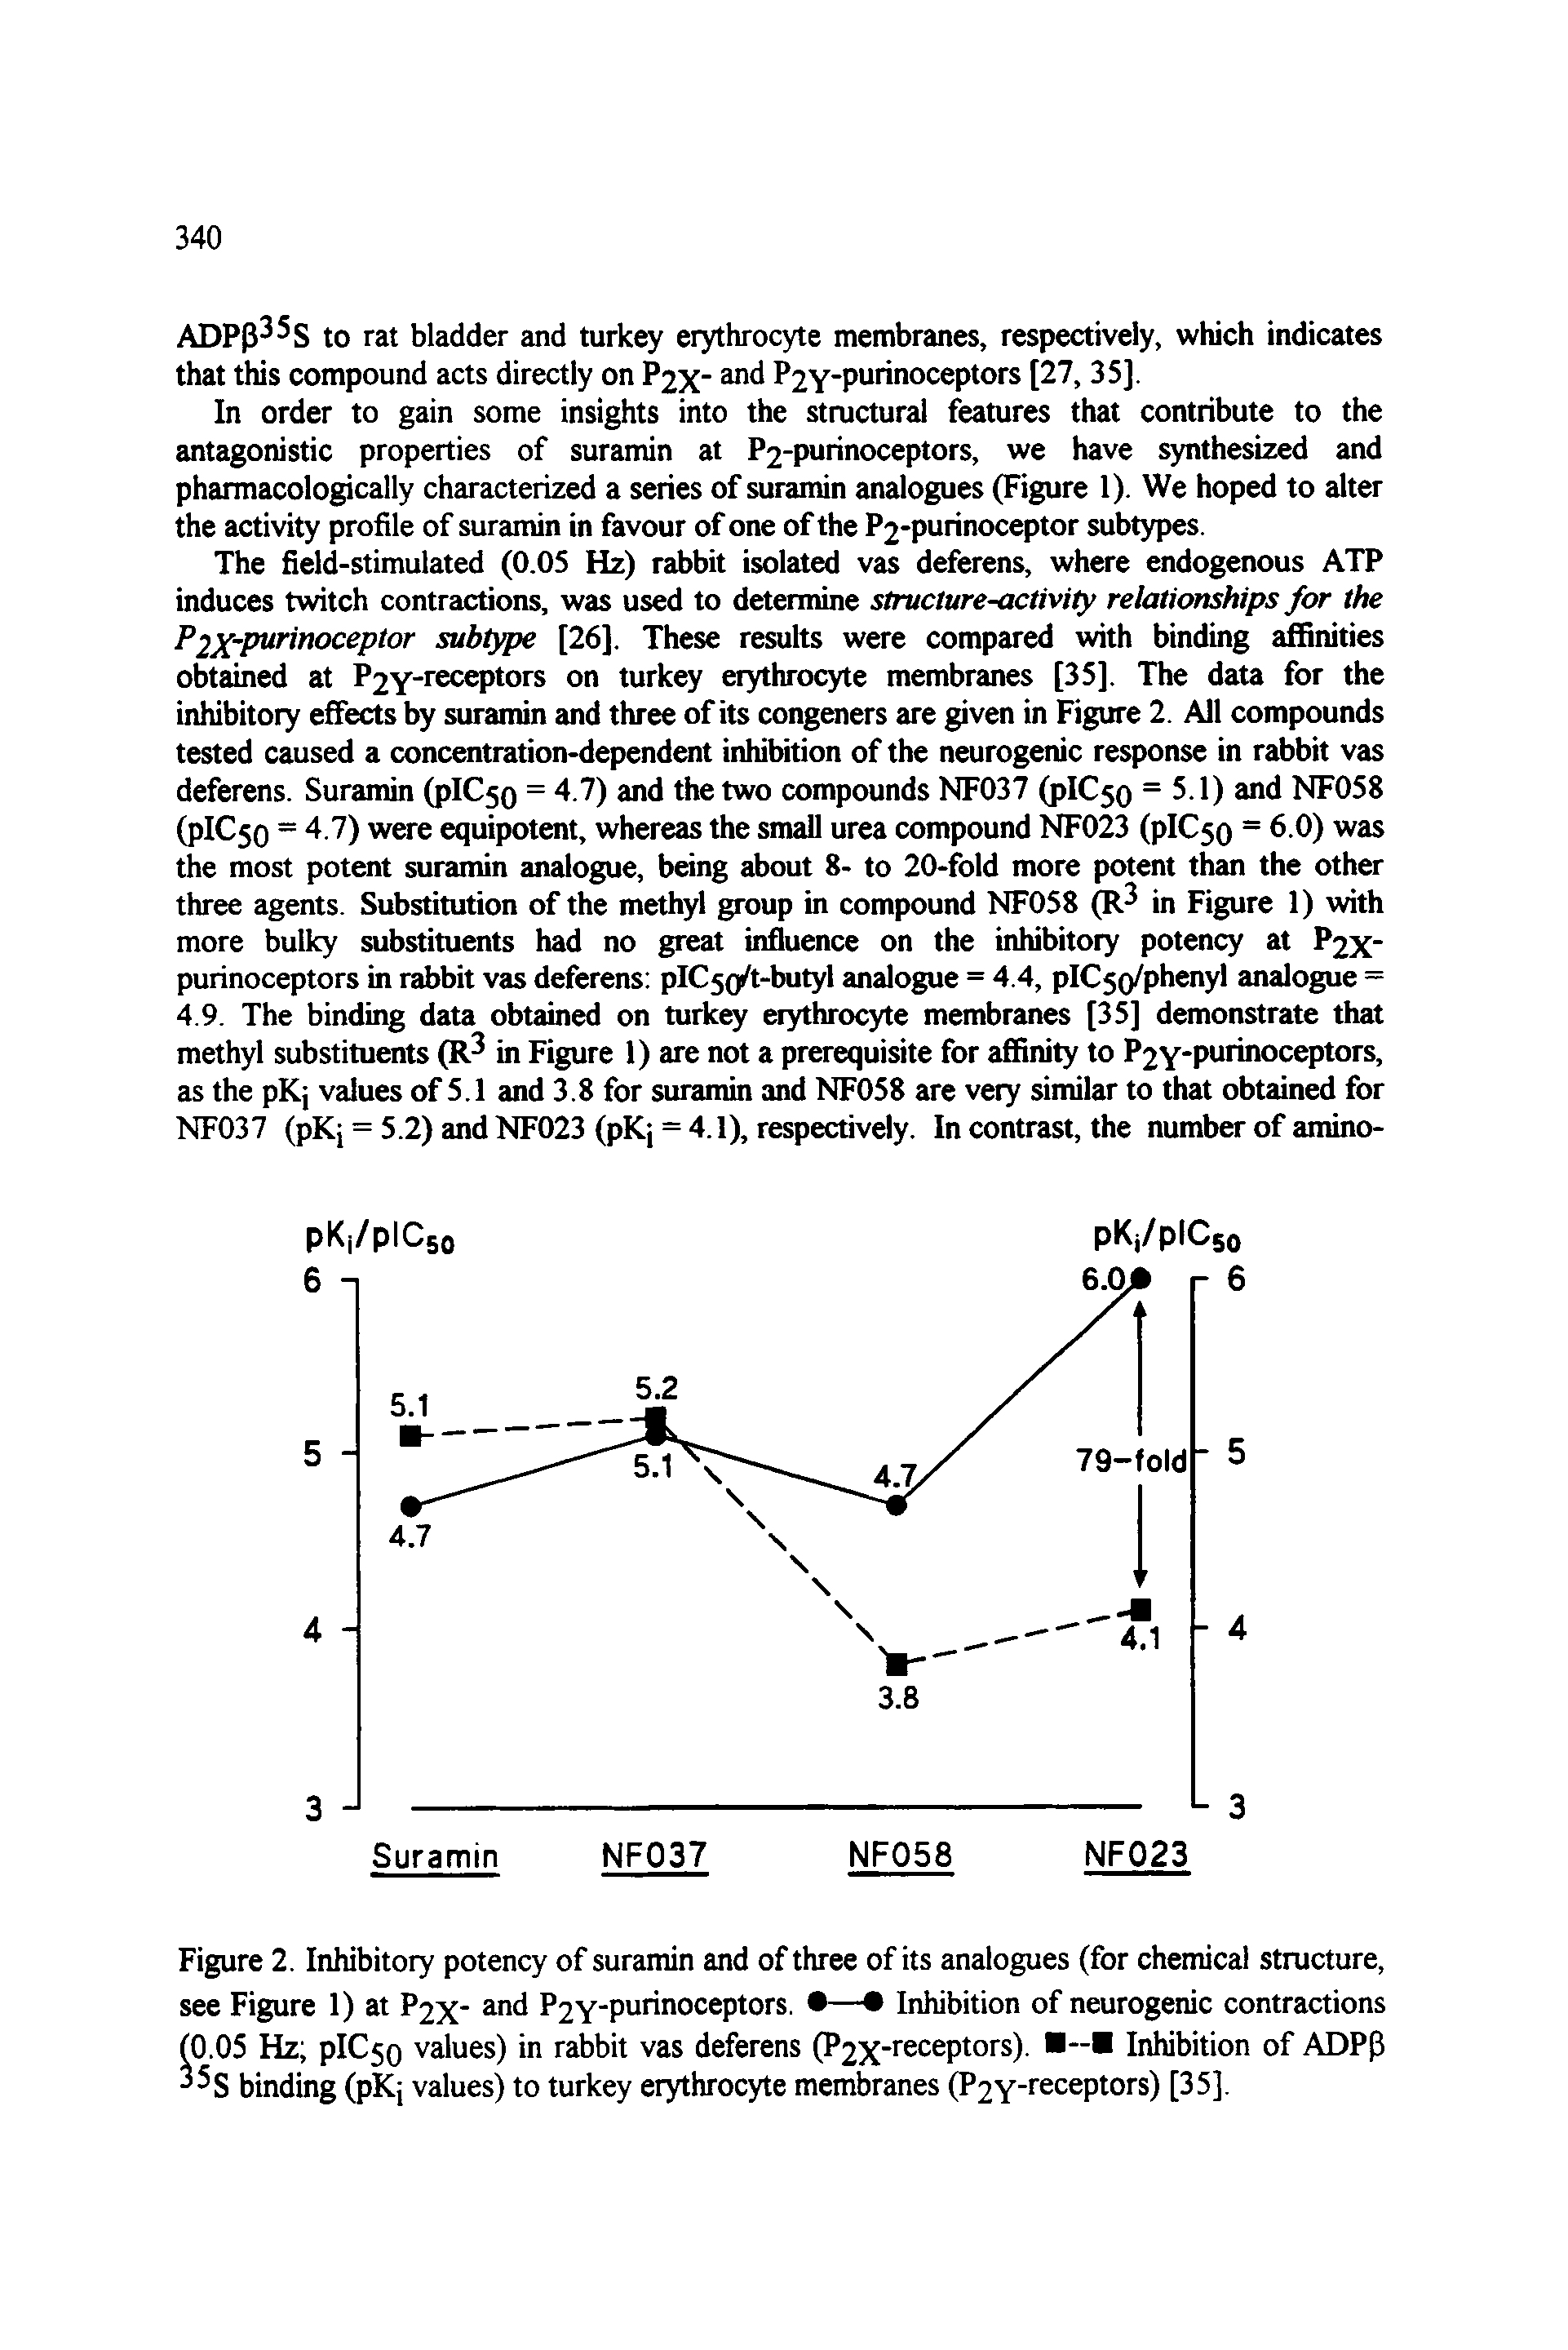 Figure 2. Inhibitory potency of suramin and of three of its analogues (for chemical structure, see Figure 1) at P2X P2Y"Purinoceptors. — Inhibition of neurogenic contractions (0.05 Hz plCfo values) in rabbit vas deferens (P2X-receptors). -- Inhibition of ADP(3 binding (pKj values) to turkey erythrocyte membranes (P2Y- "sceptors) [35].